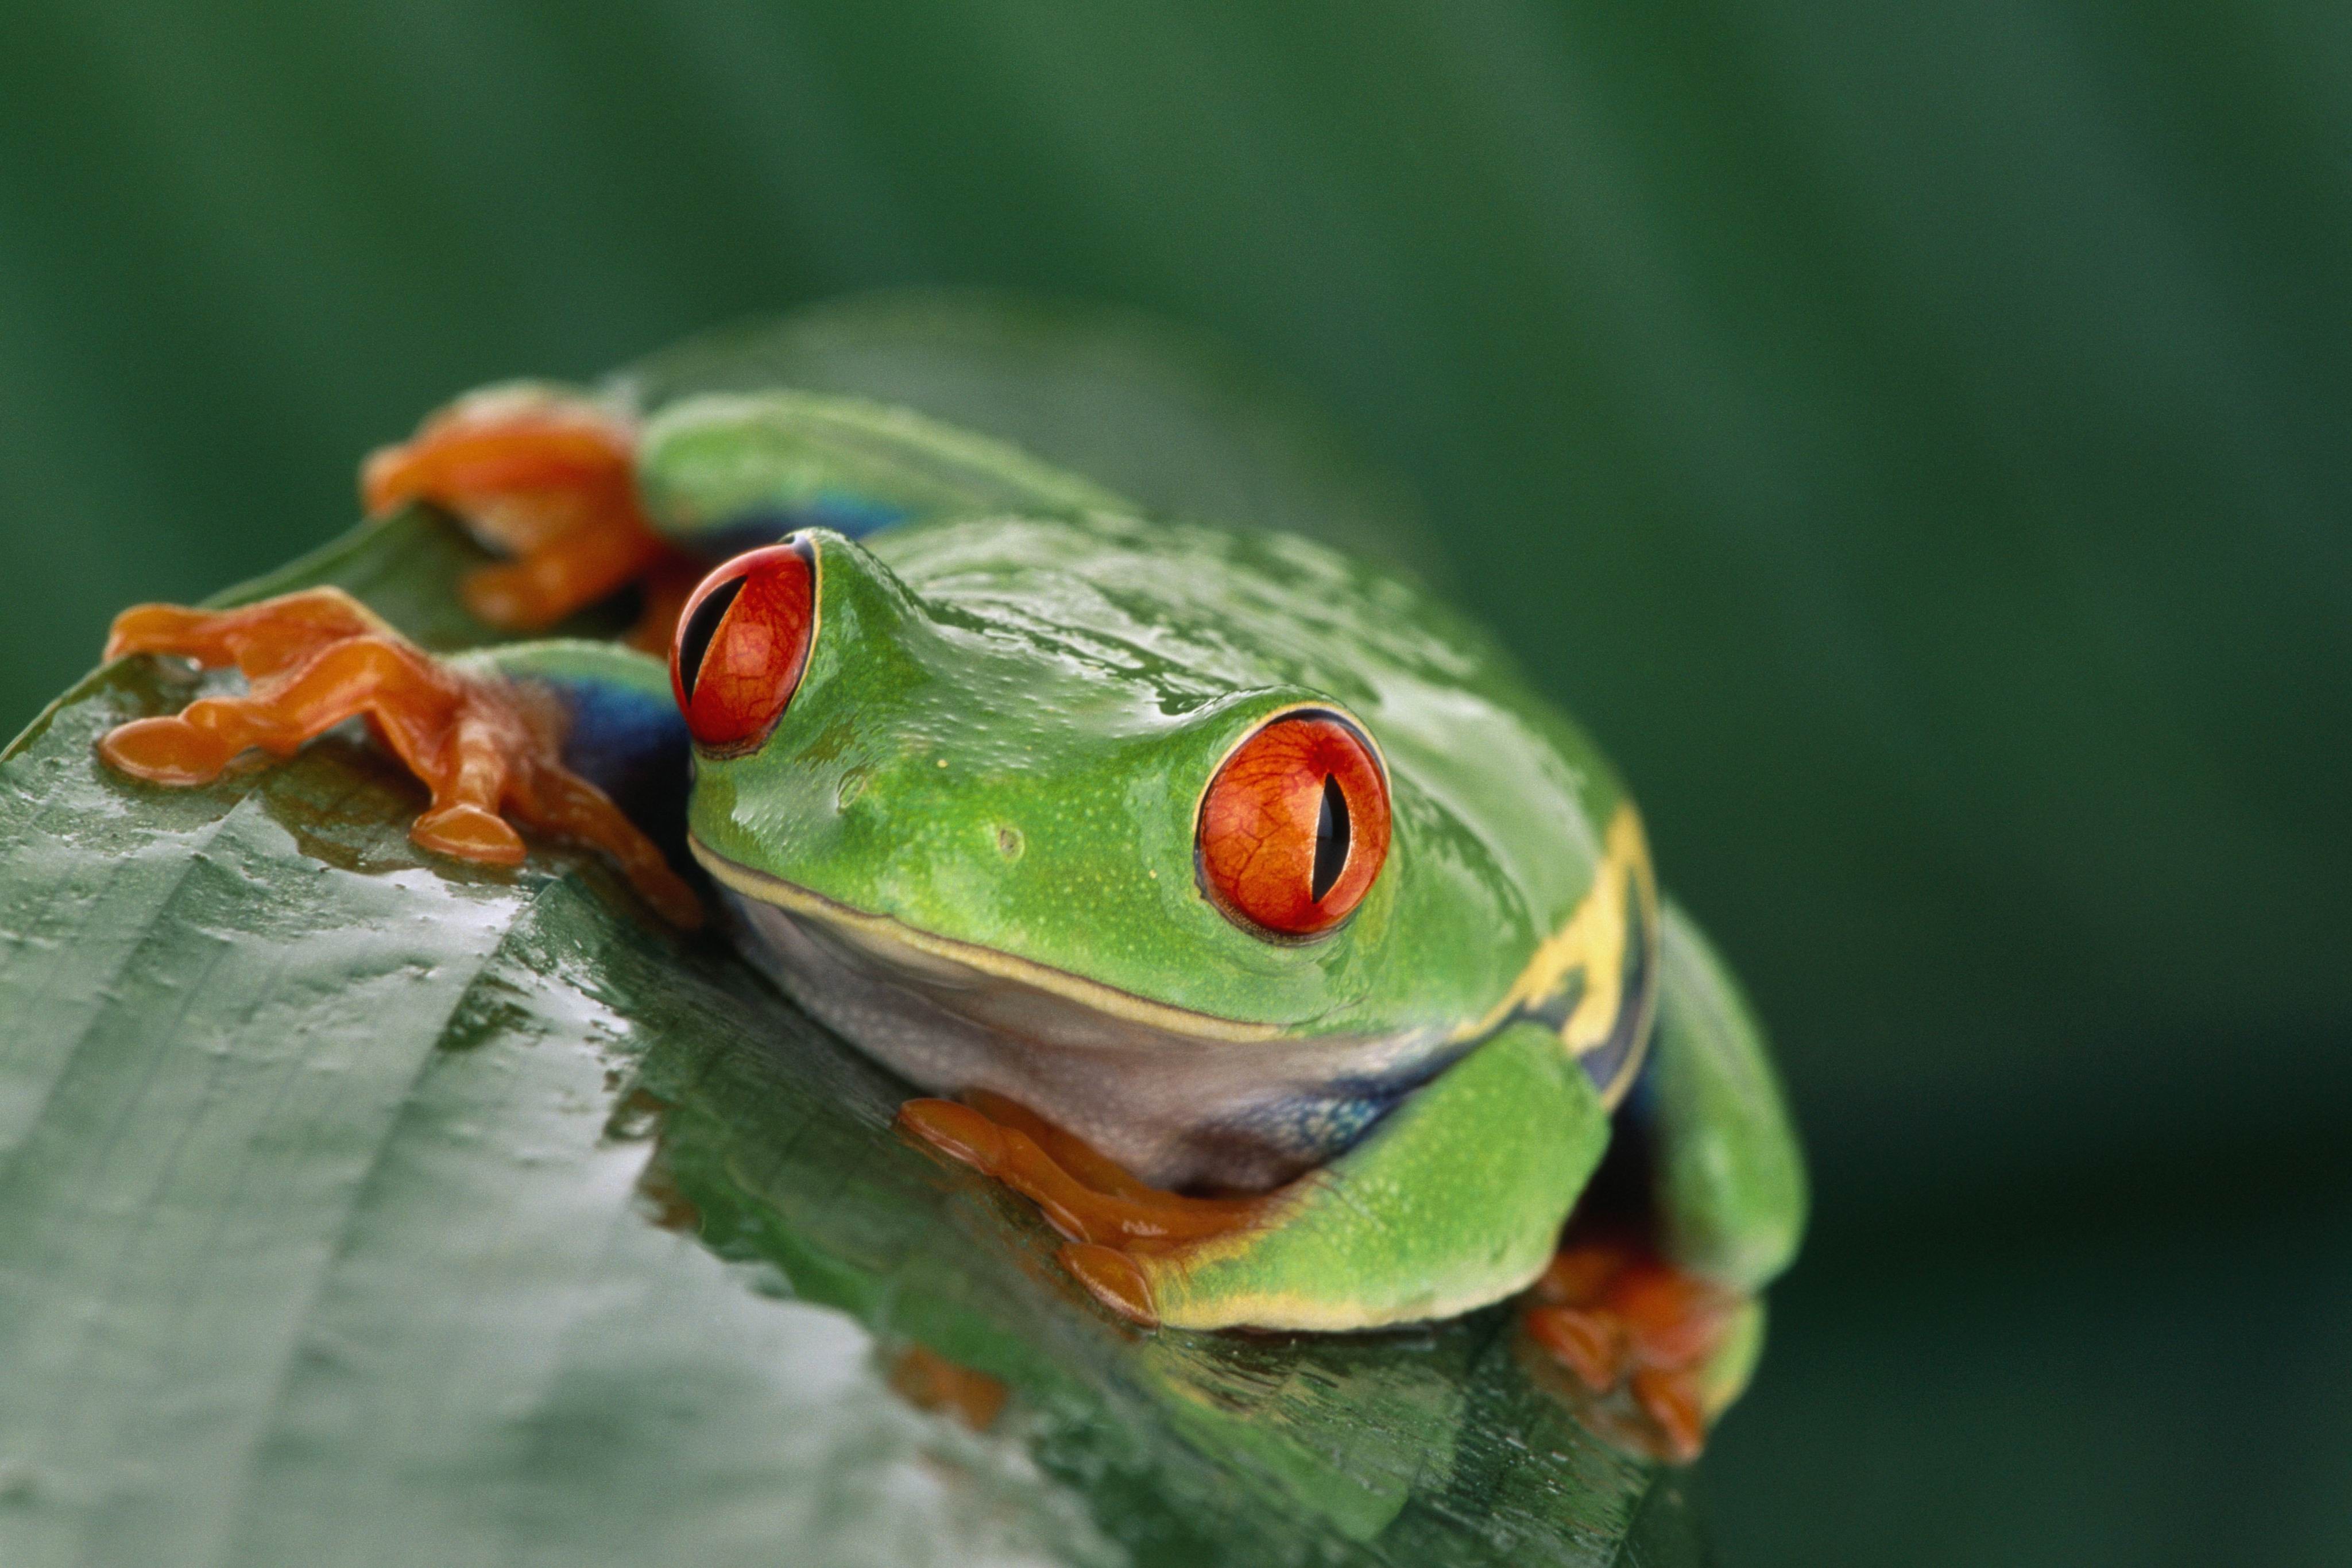 General 4096x2731 animals wildlife nature frog amphibian Red-Eyed Tree Frogs closeup